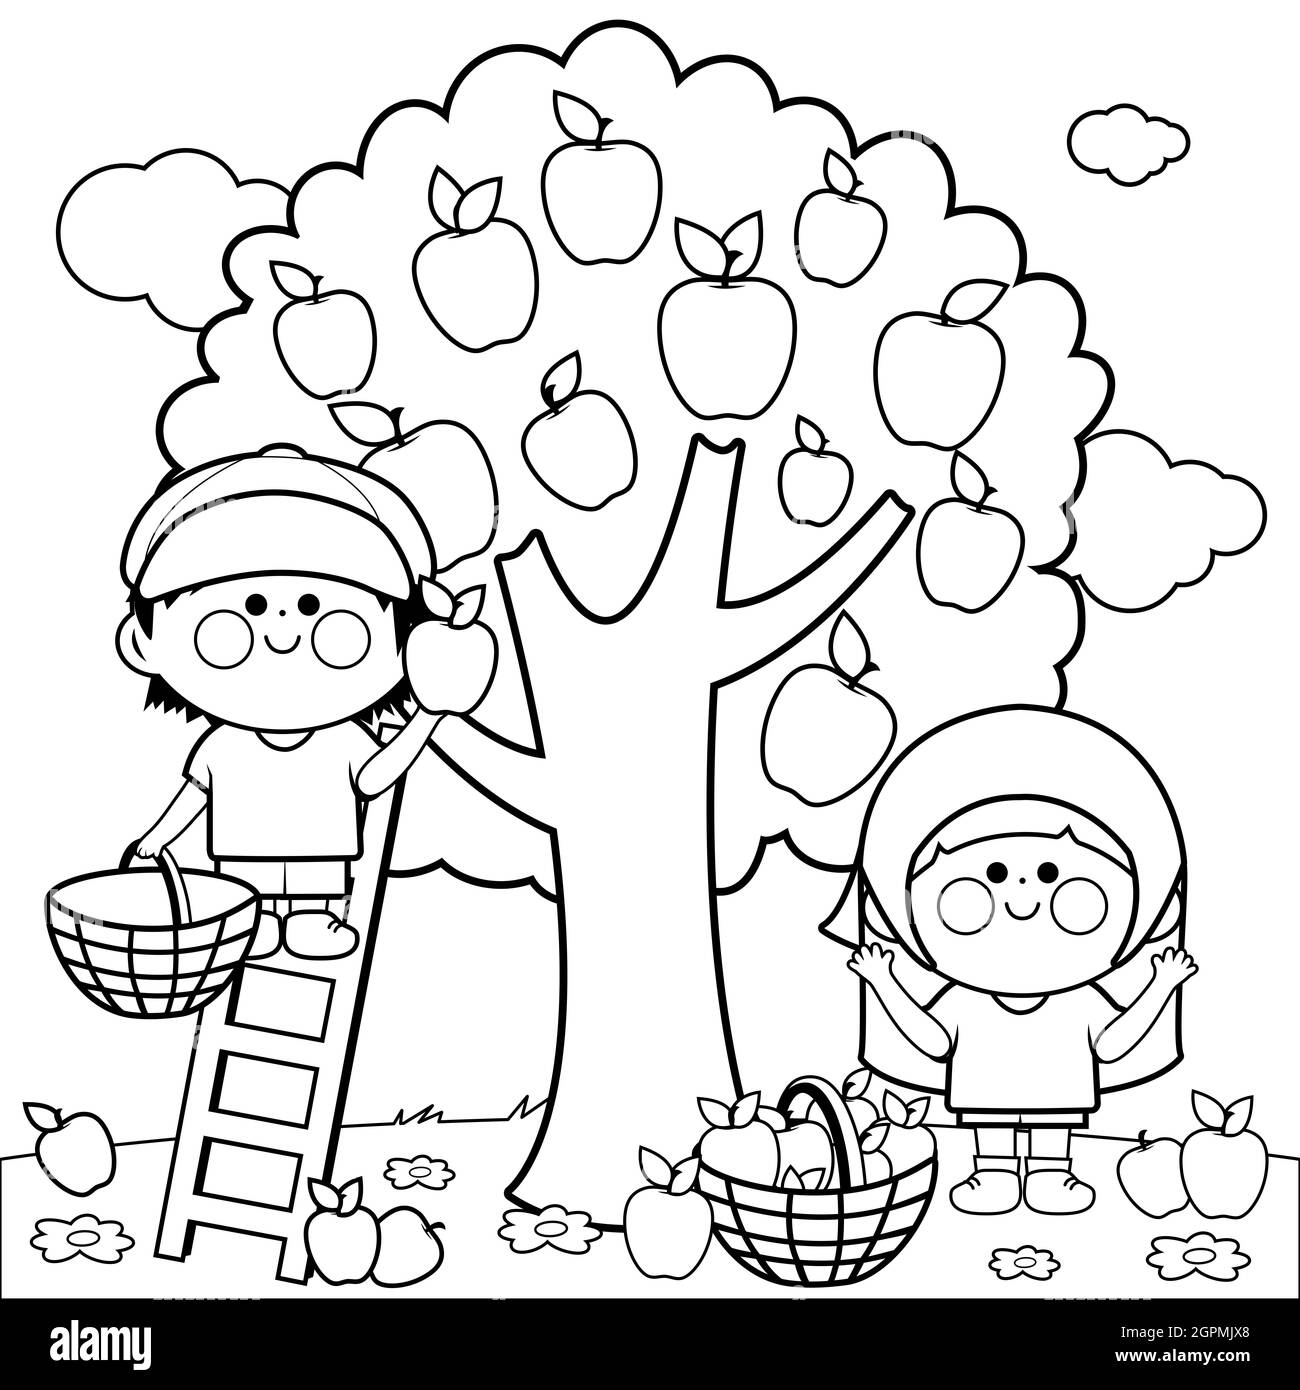 Two children, a boy and a girl picking apples under an apple tree. Boy is on a ladder picking apples. Black and white coloring page. Stock Photo